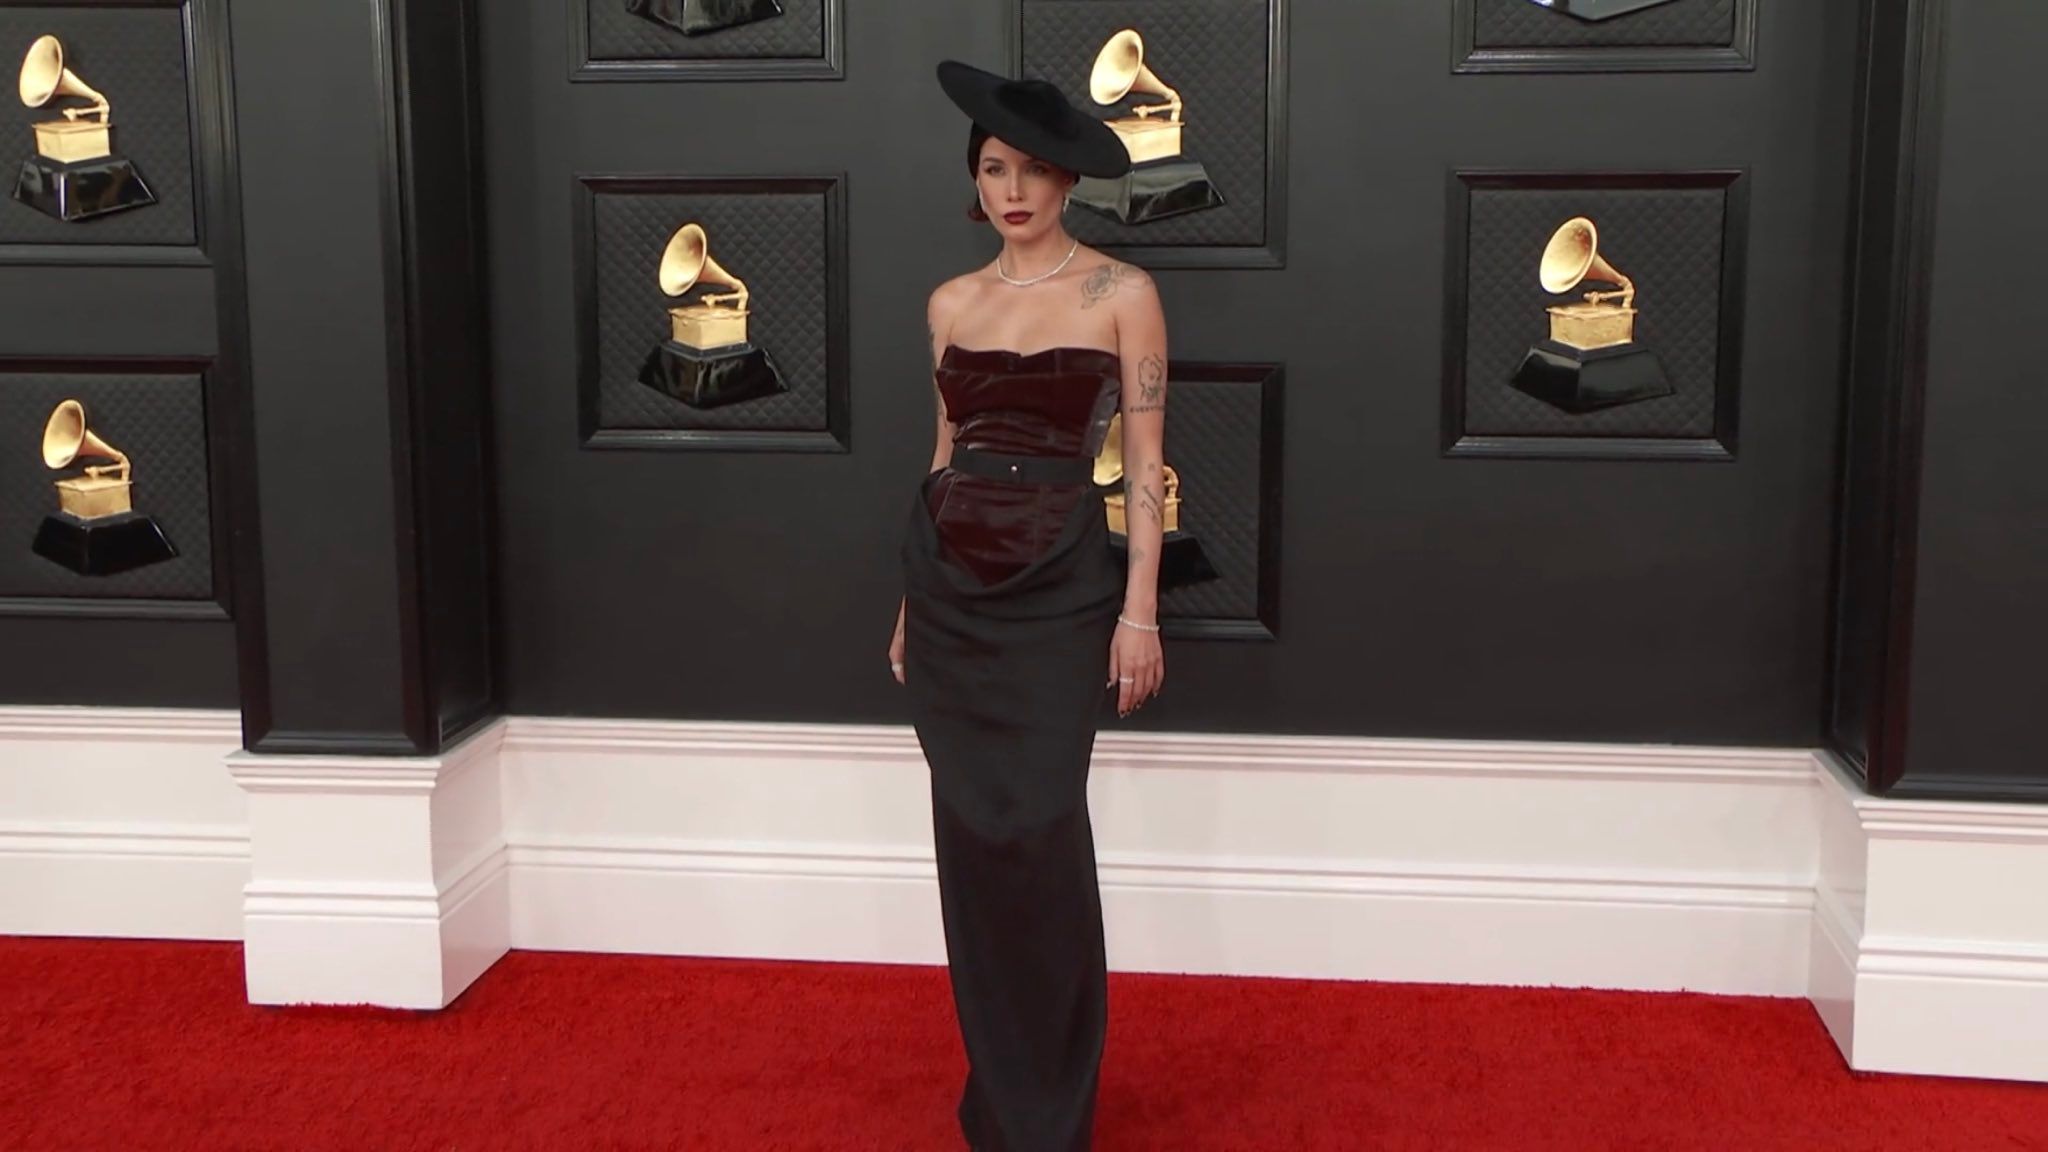 Grammys 2022: Internet smitten by singer Halsey’s red carpet look. See pics